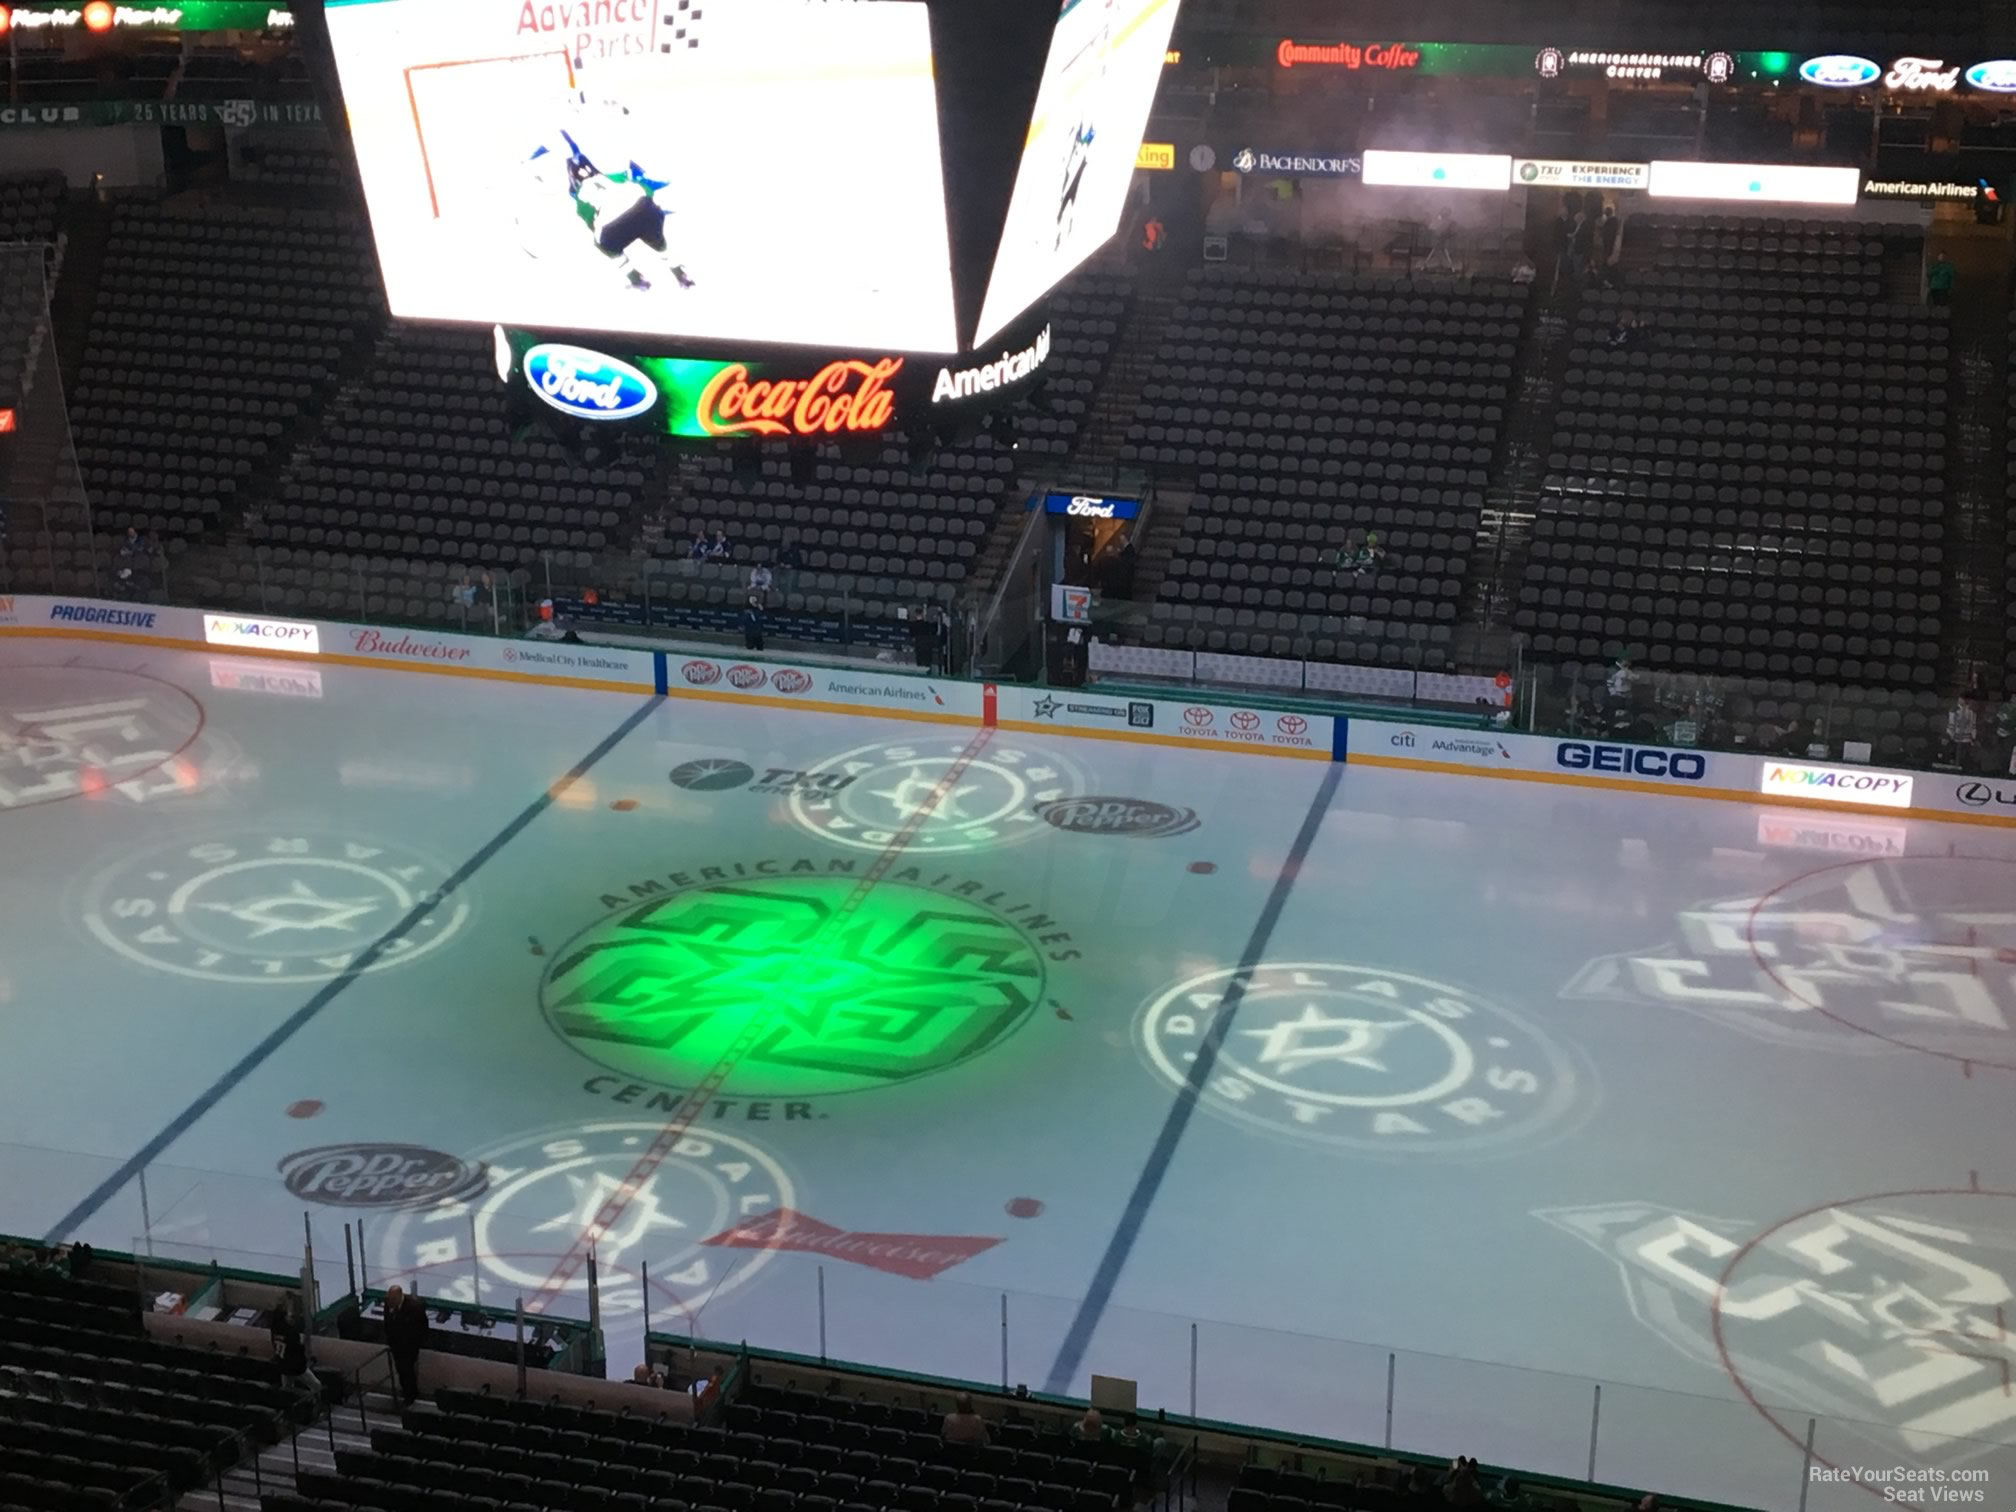 section 308 seat view  for hockey - american airlines center